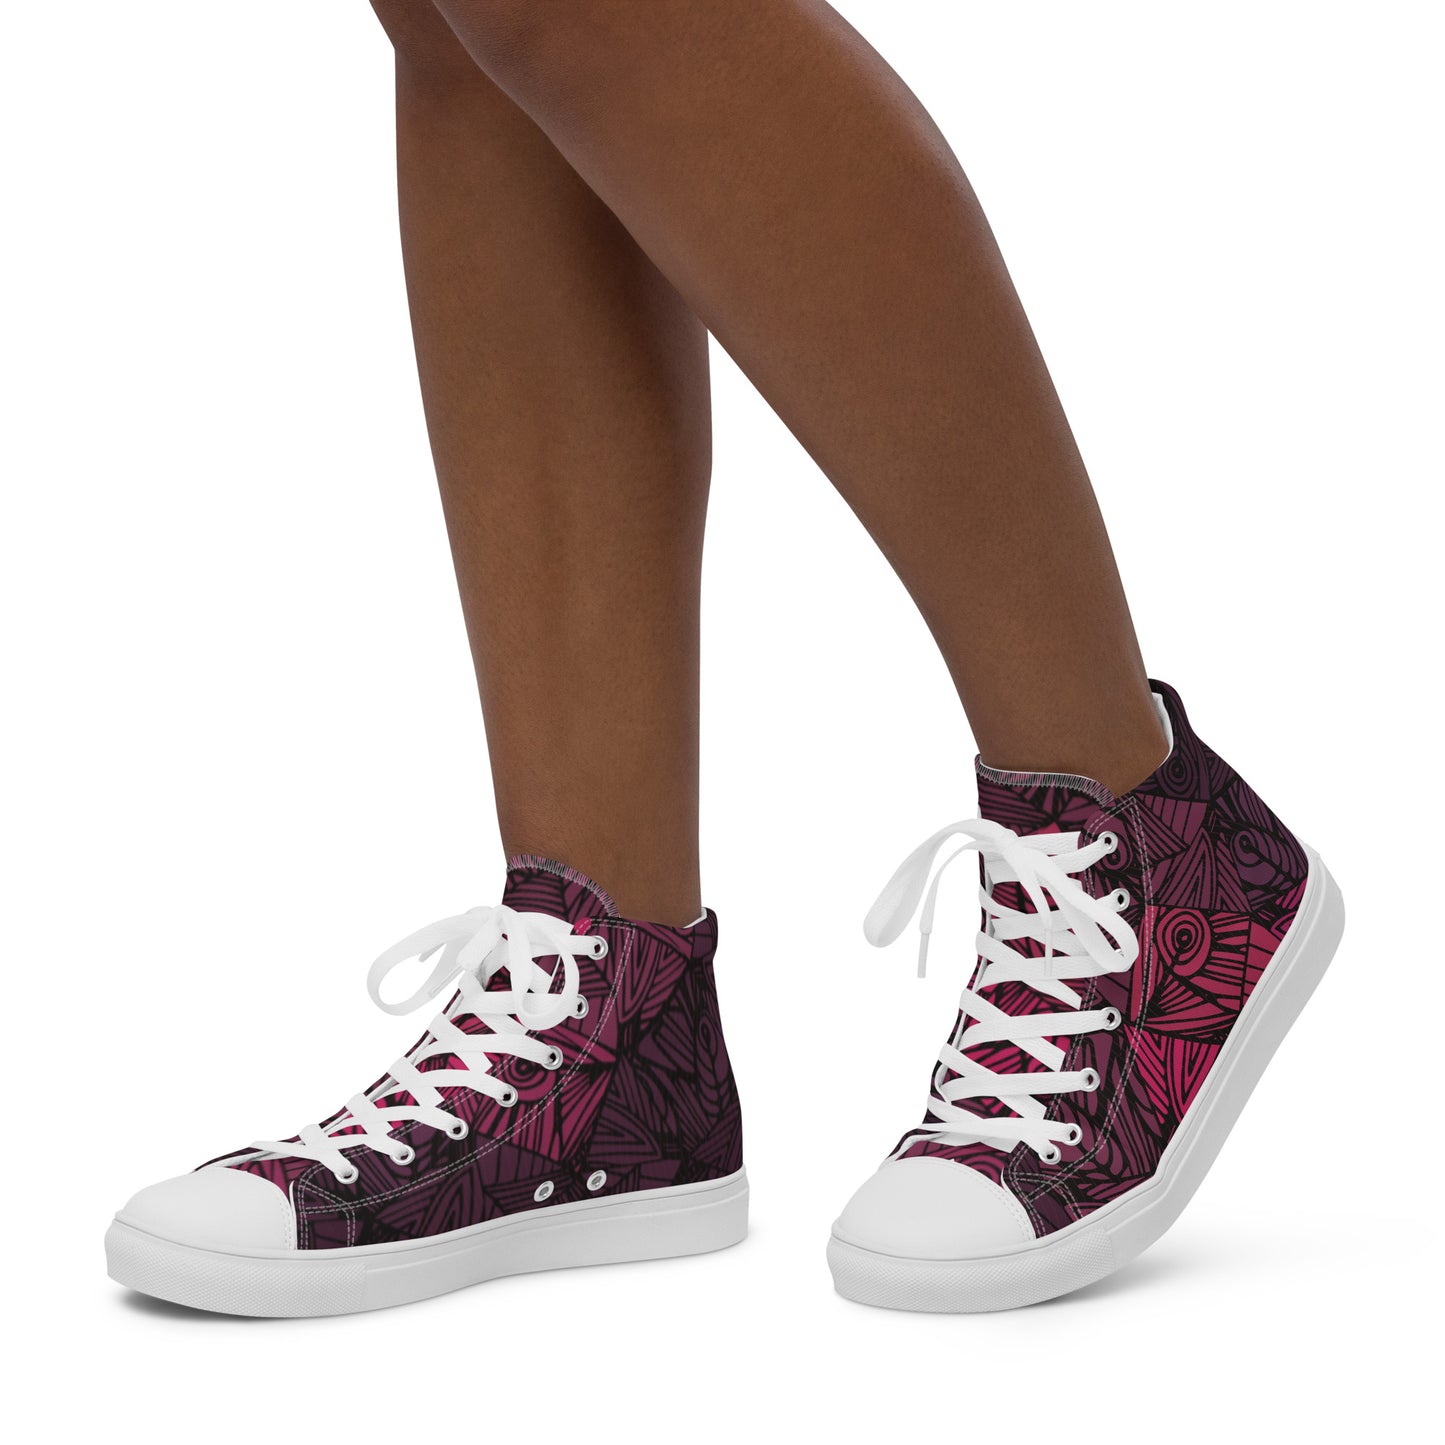 Worldtown Guaranteed To Dream Women’s High Top Canvas Shoes